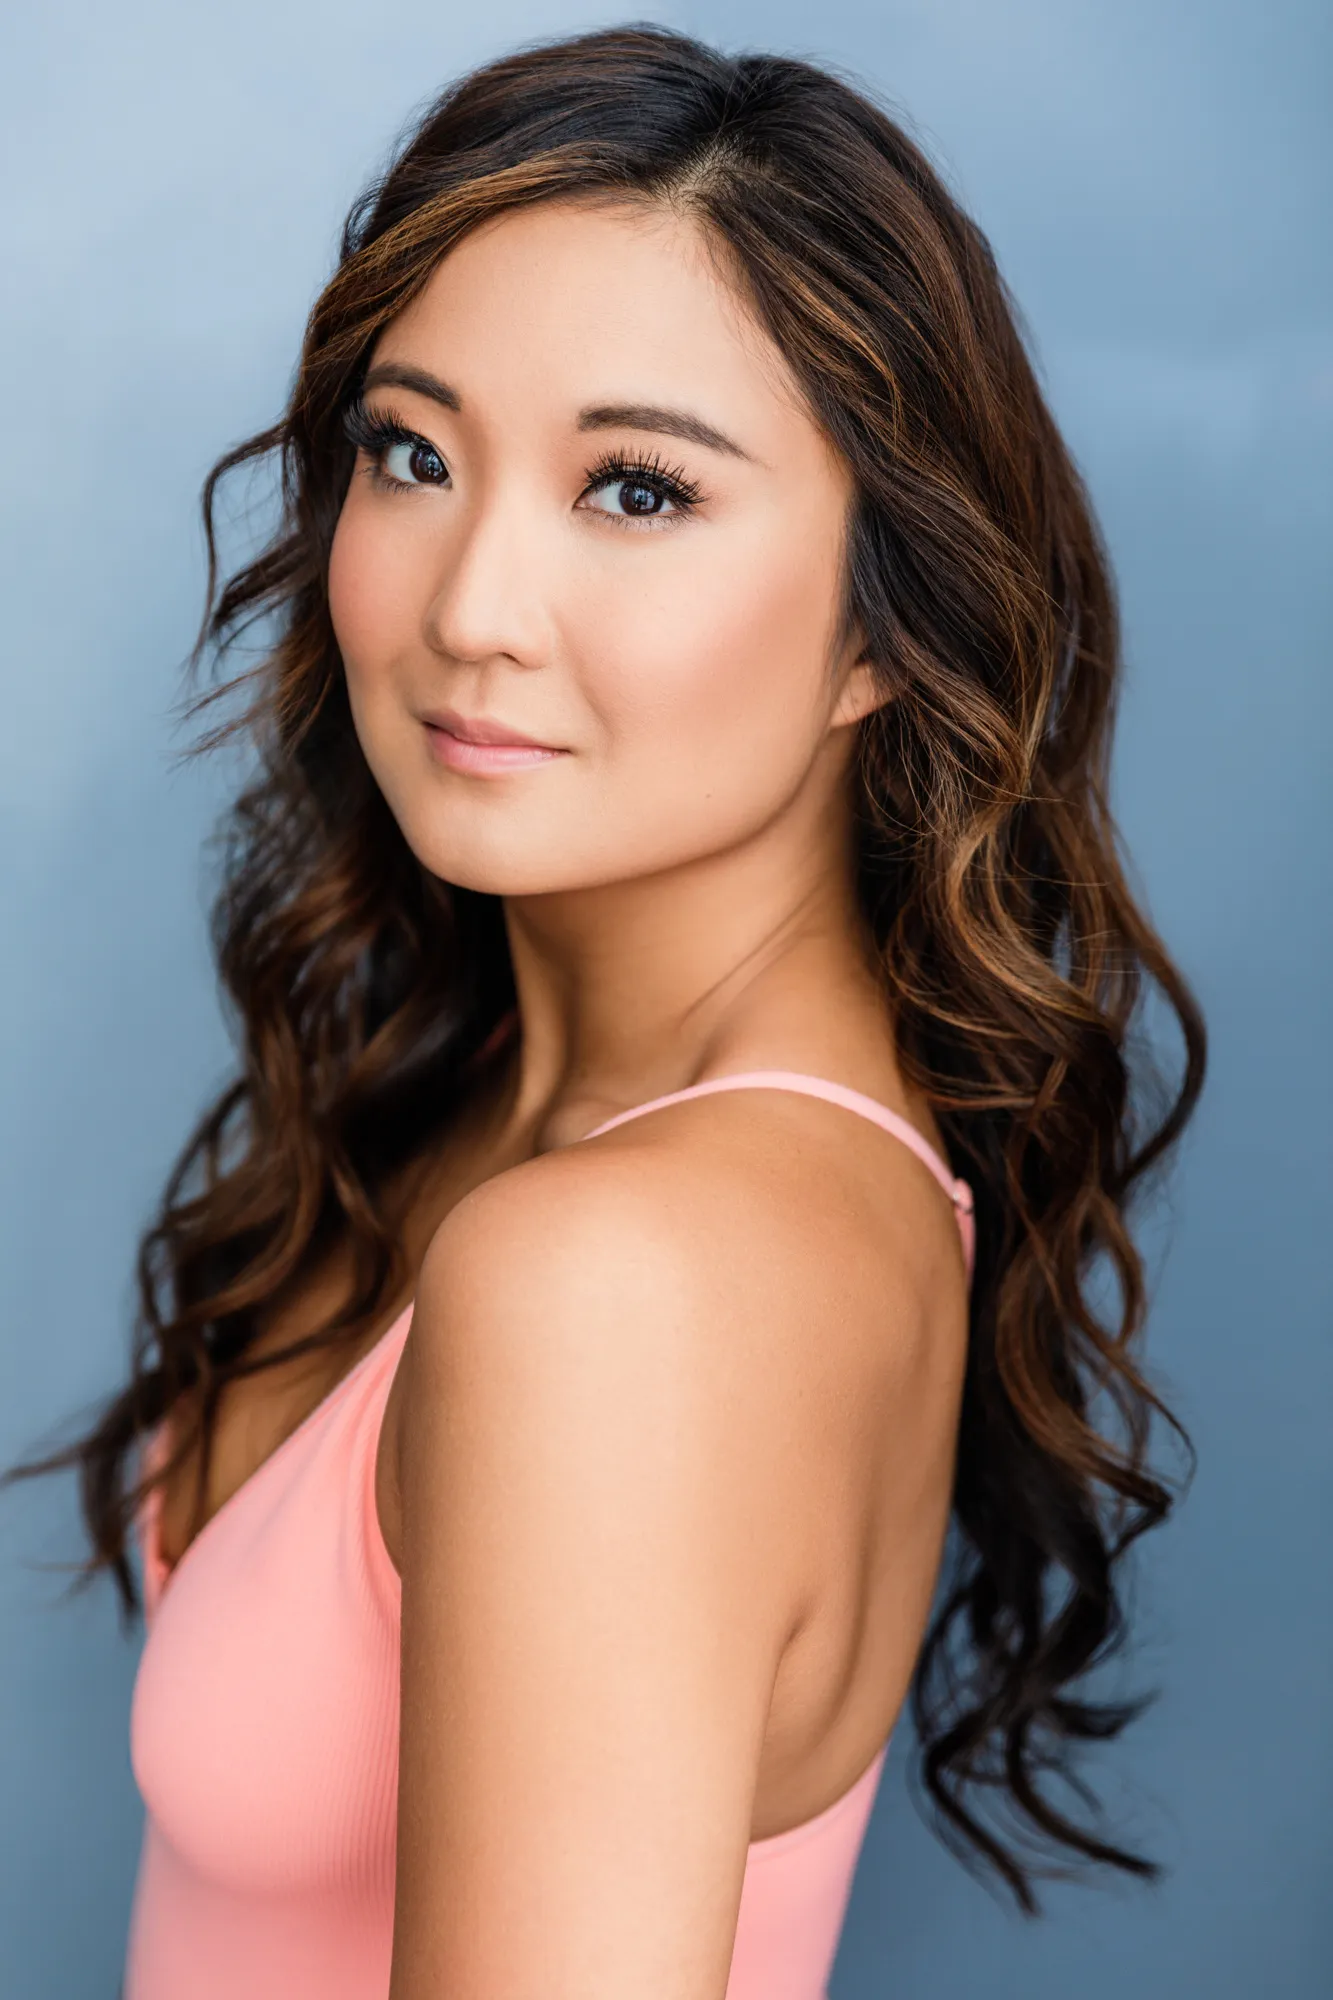 Ashley Park joins Hulu hit series 'Only Murders in the Building' season 3 as Broadway actor Kimber | FMV6